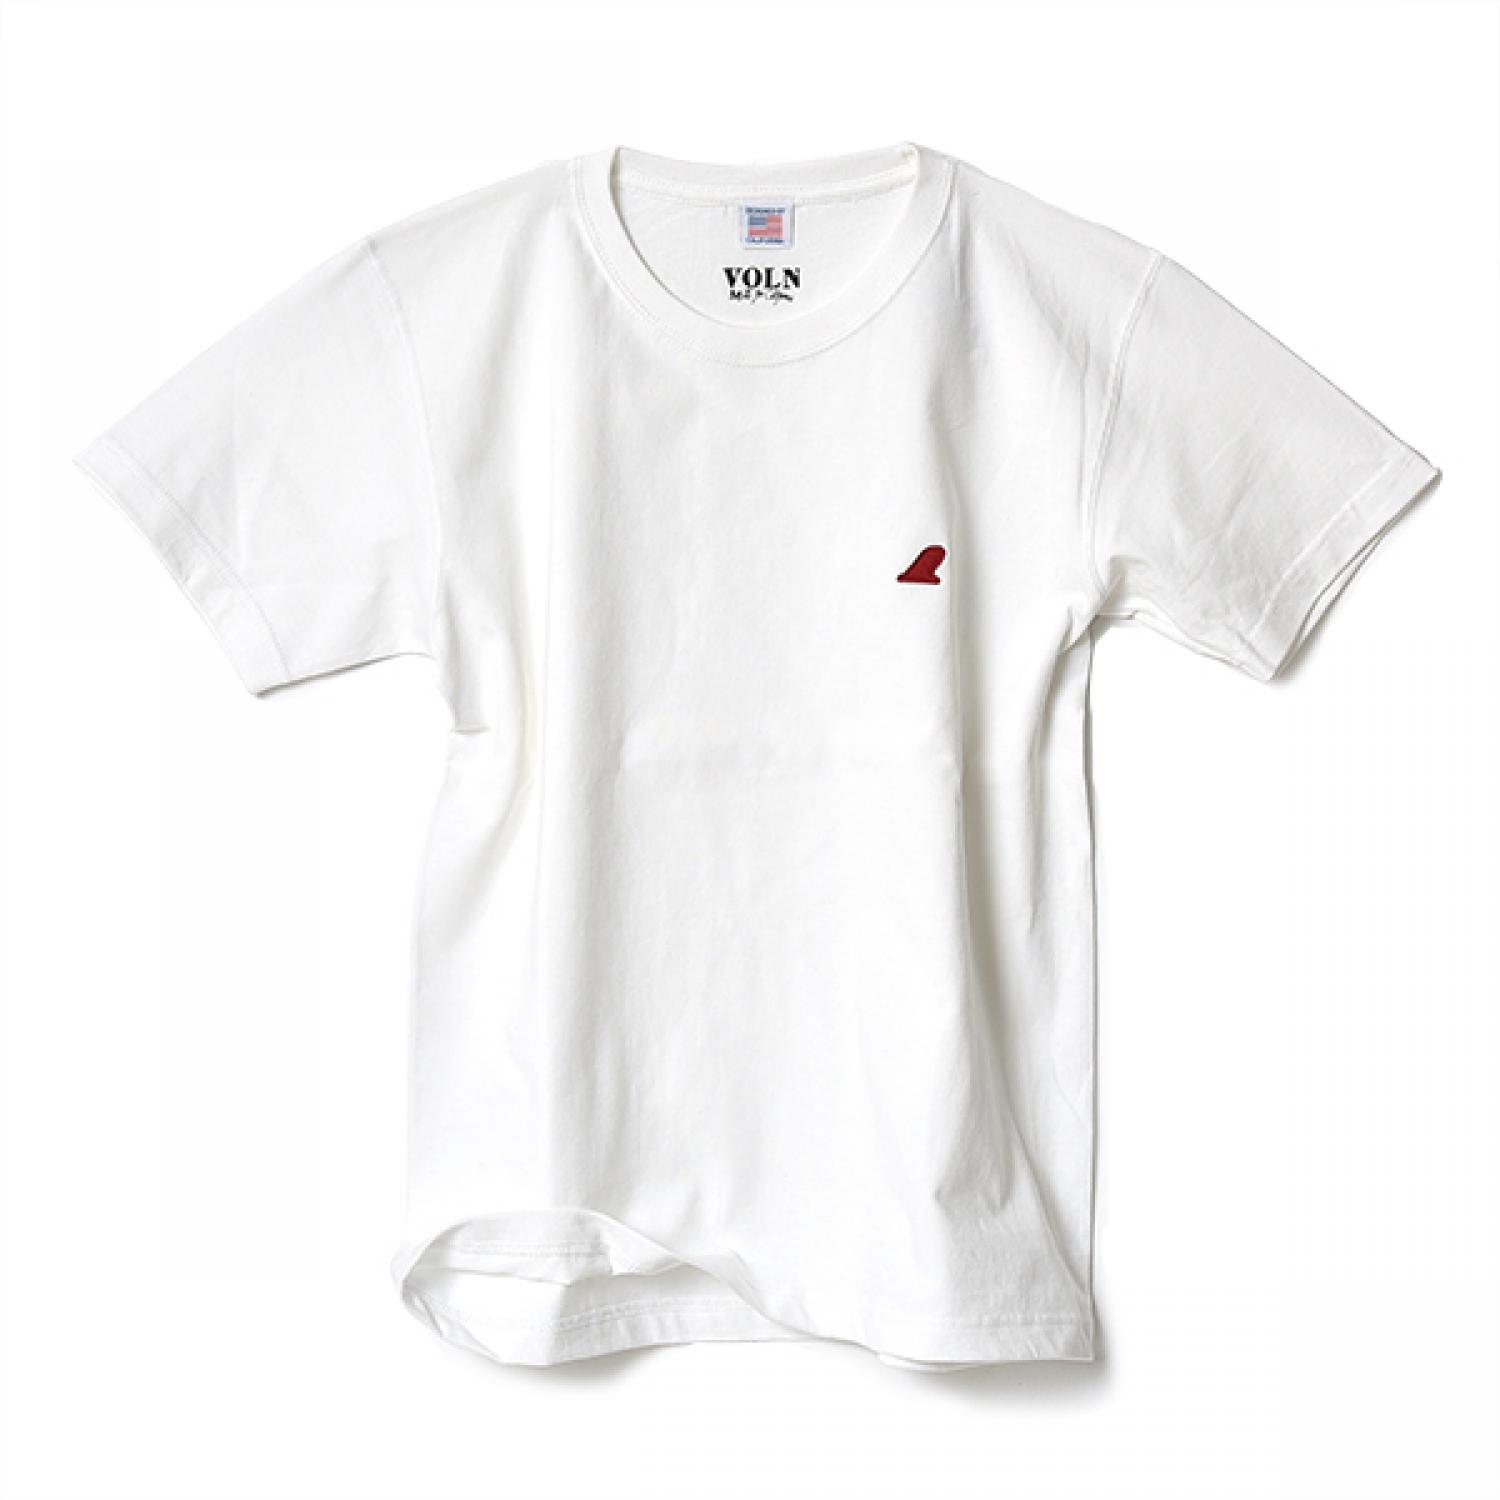 VOLN CREW NECK T-SHIRT  RED FIN  WHITE